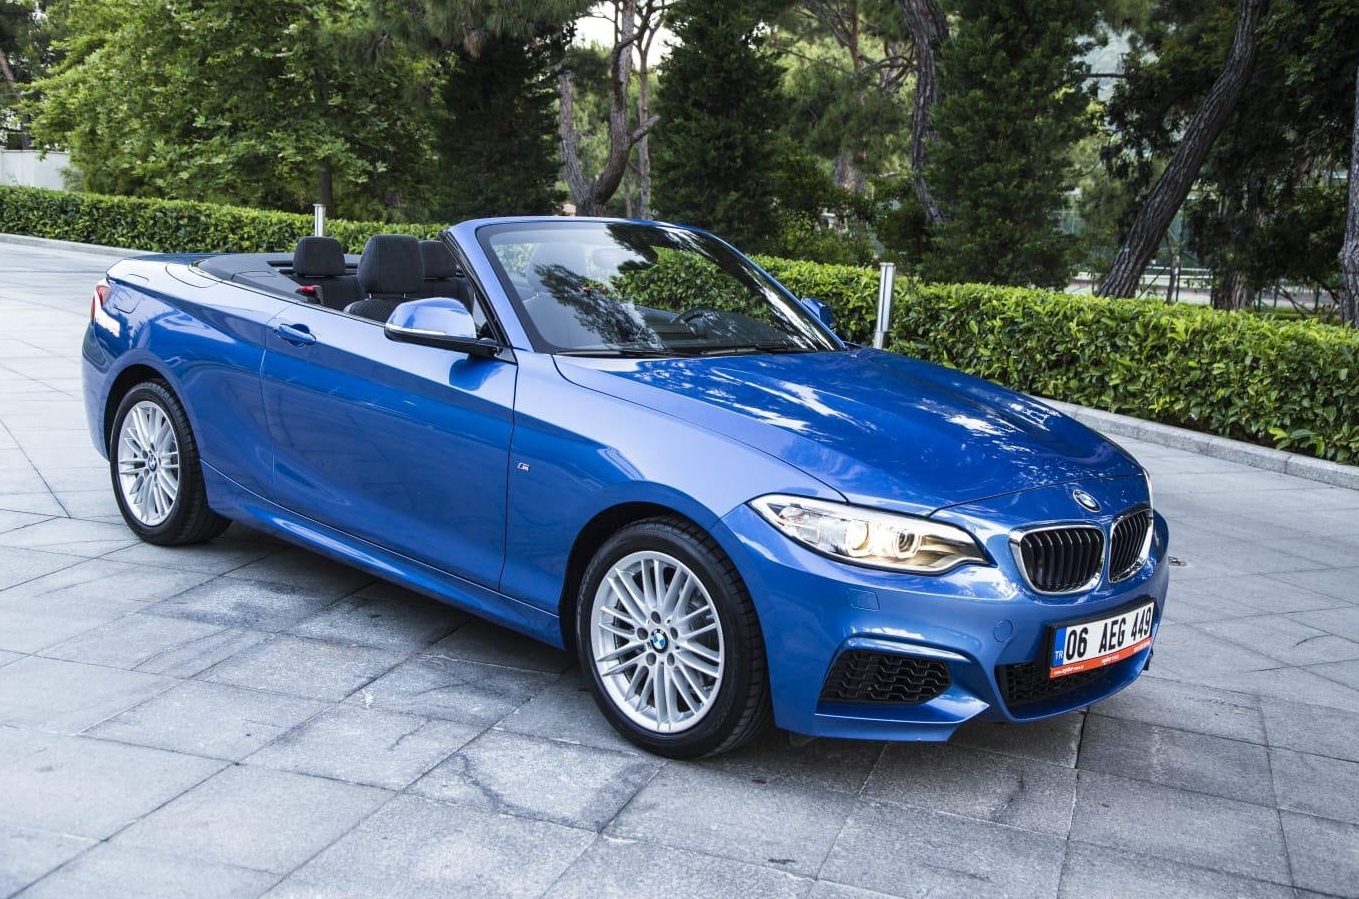 <span style="font-weight: bold;">BMW 218i Cabrio</span><br>